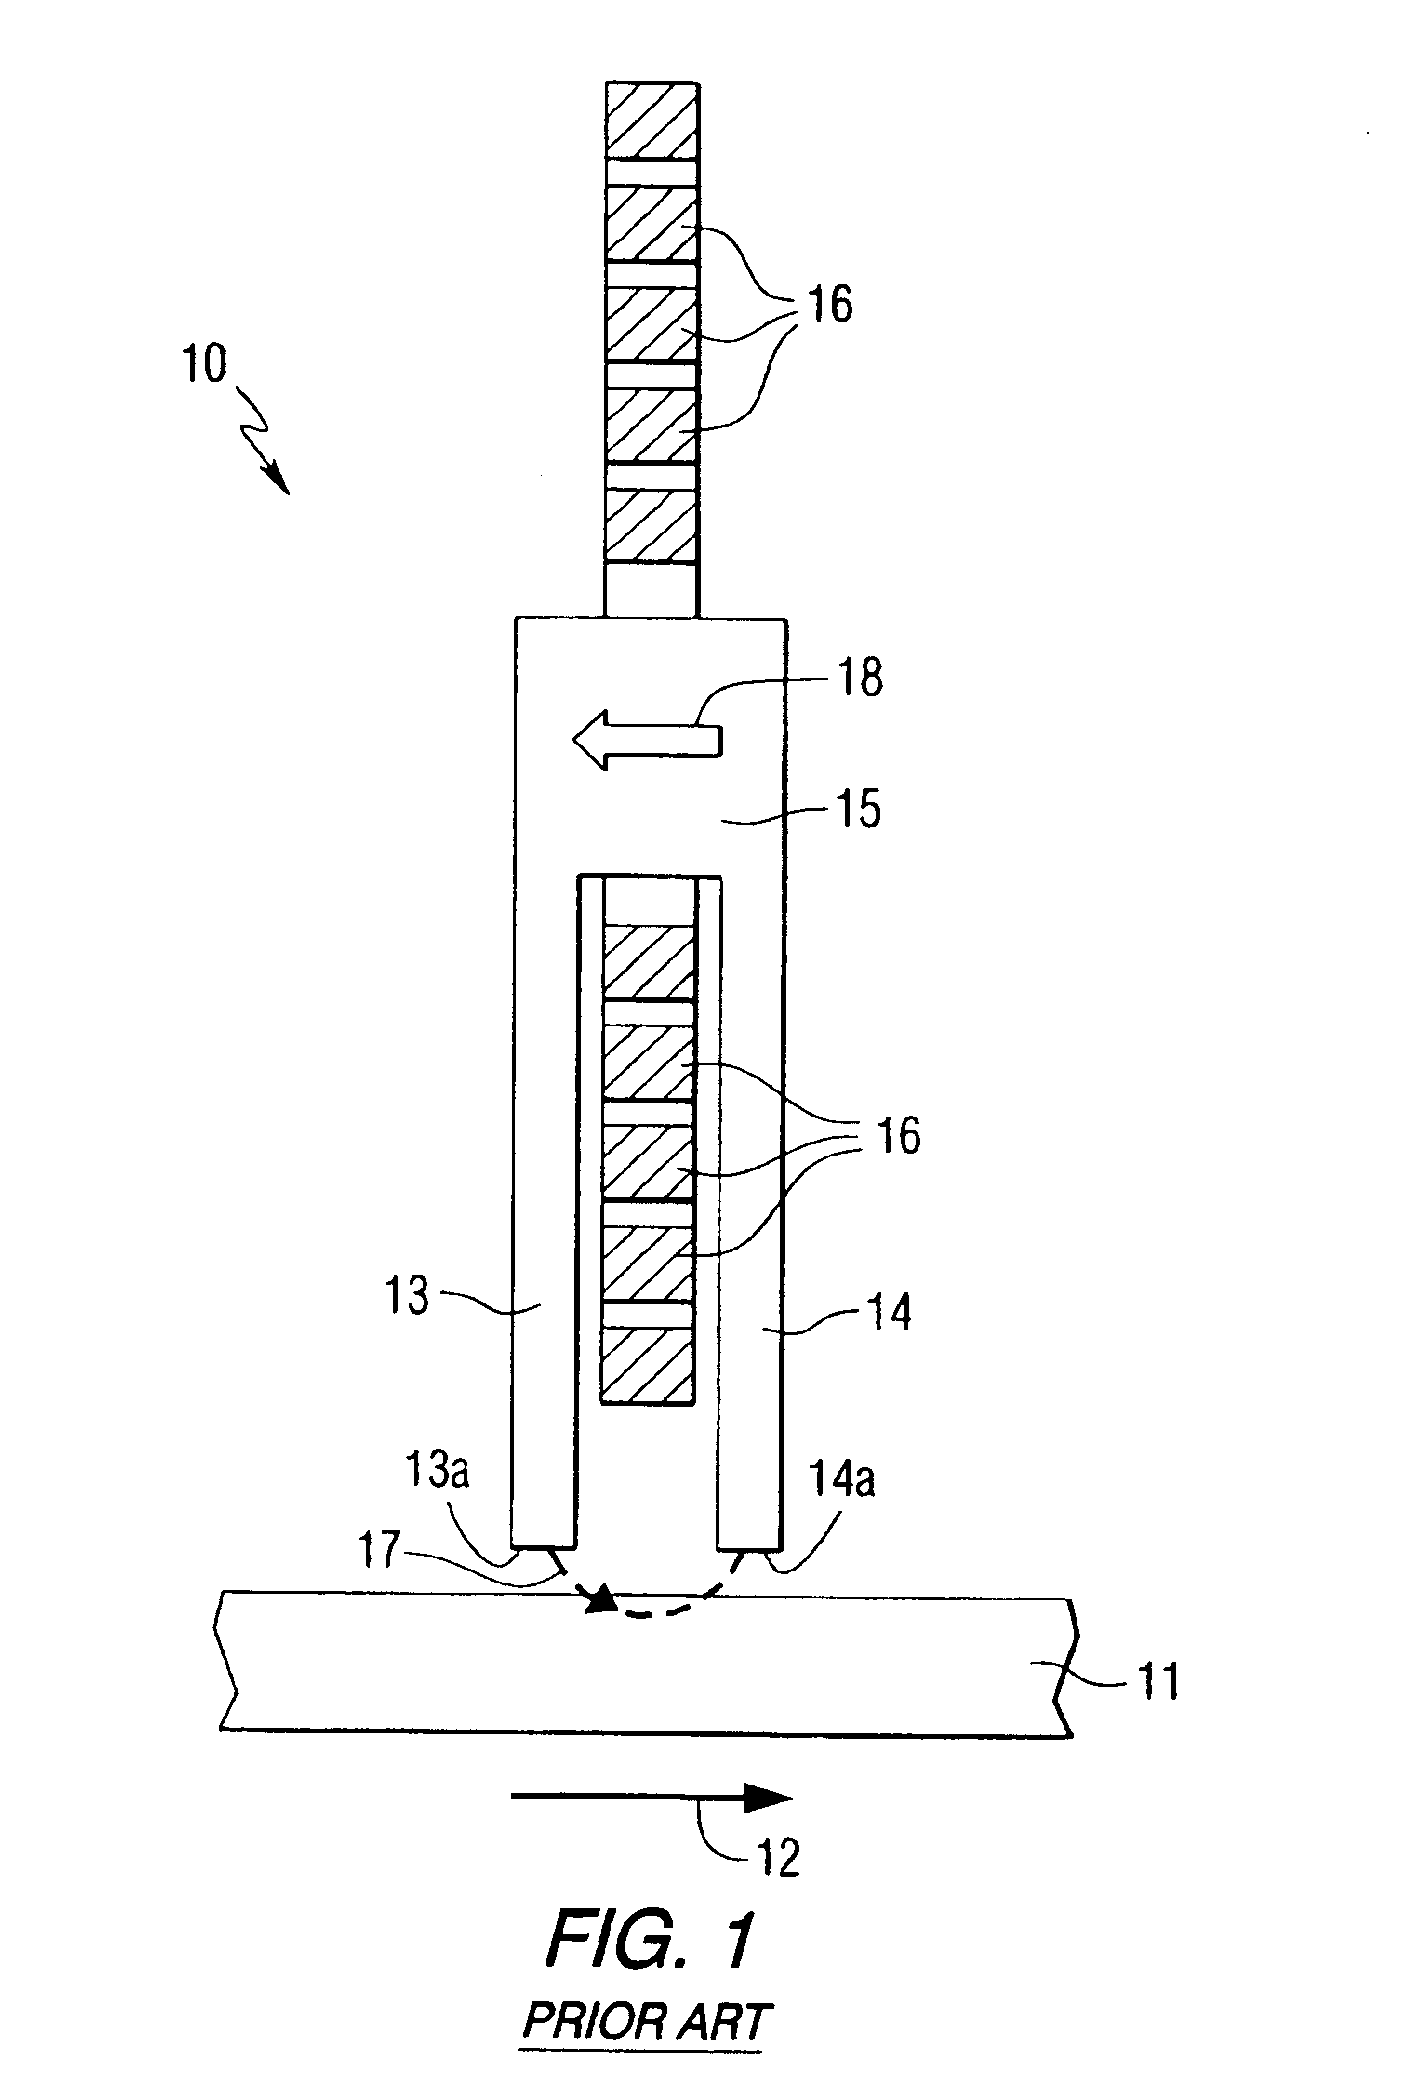 Magnetic recording head including spatially-pumped spin wave mode writer